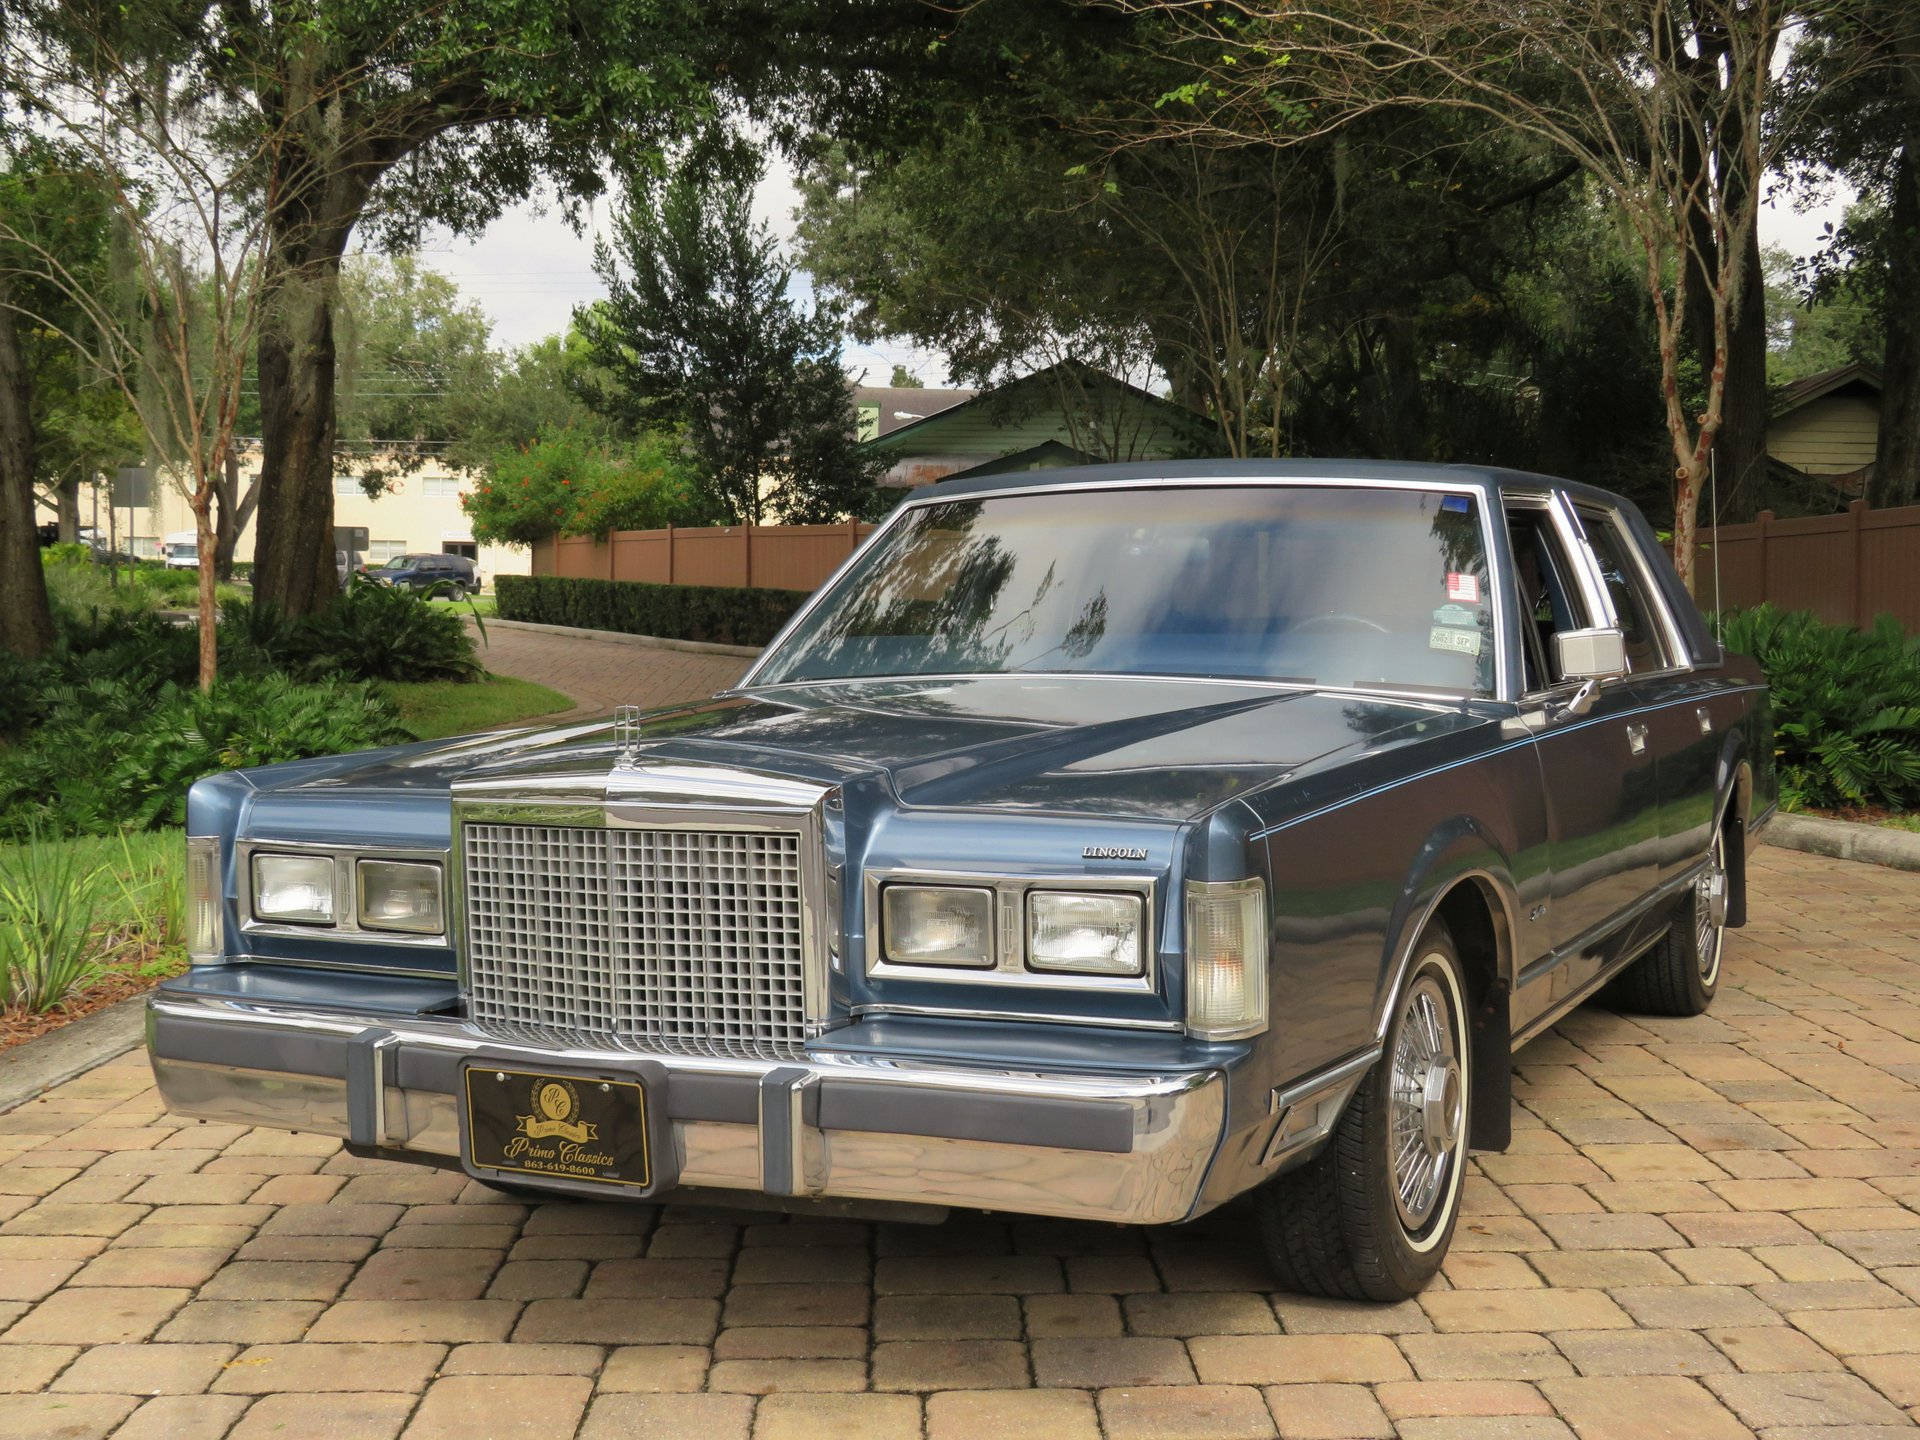 1986 Town Lincoln Car On A Paved Driveway Background